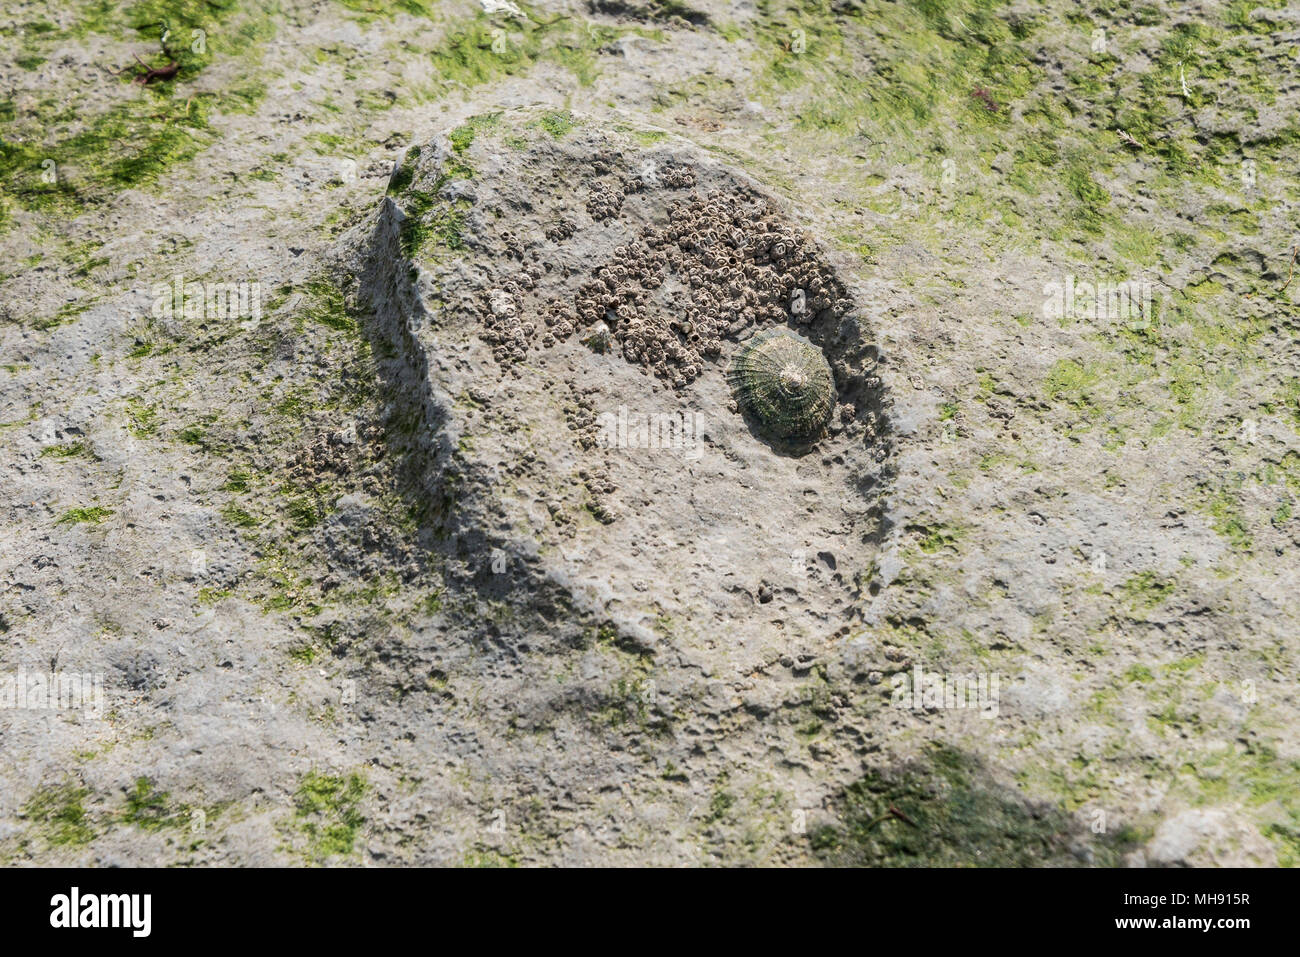 A common limpet (Patella vulgata) on a fossil embedded in rock on Monmouth beach, Lyme Regis Stock Photo